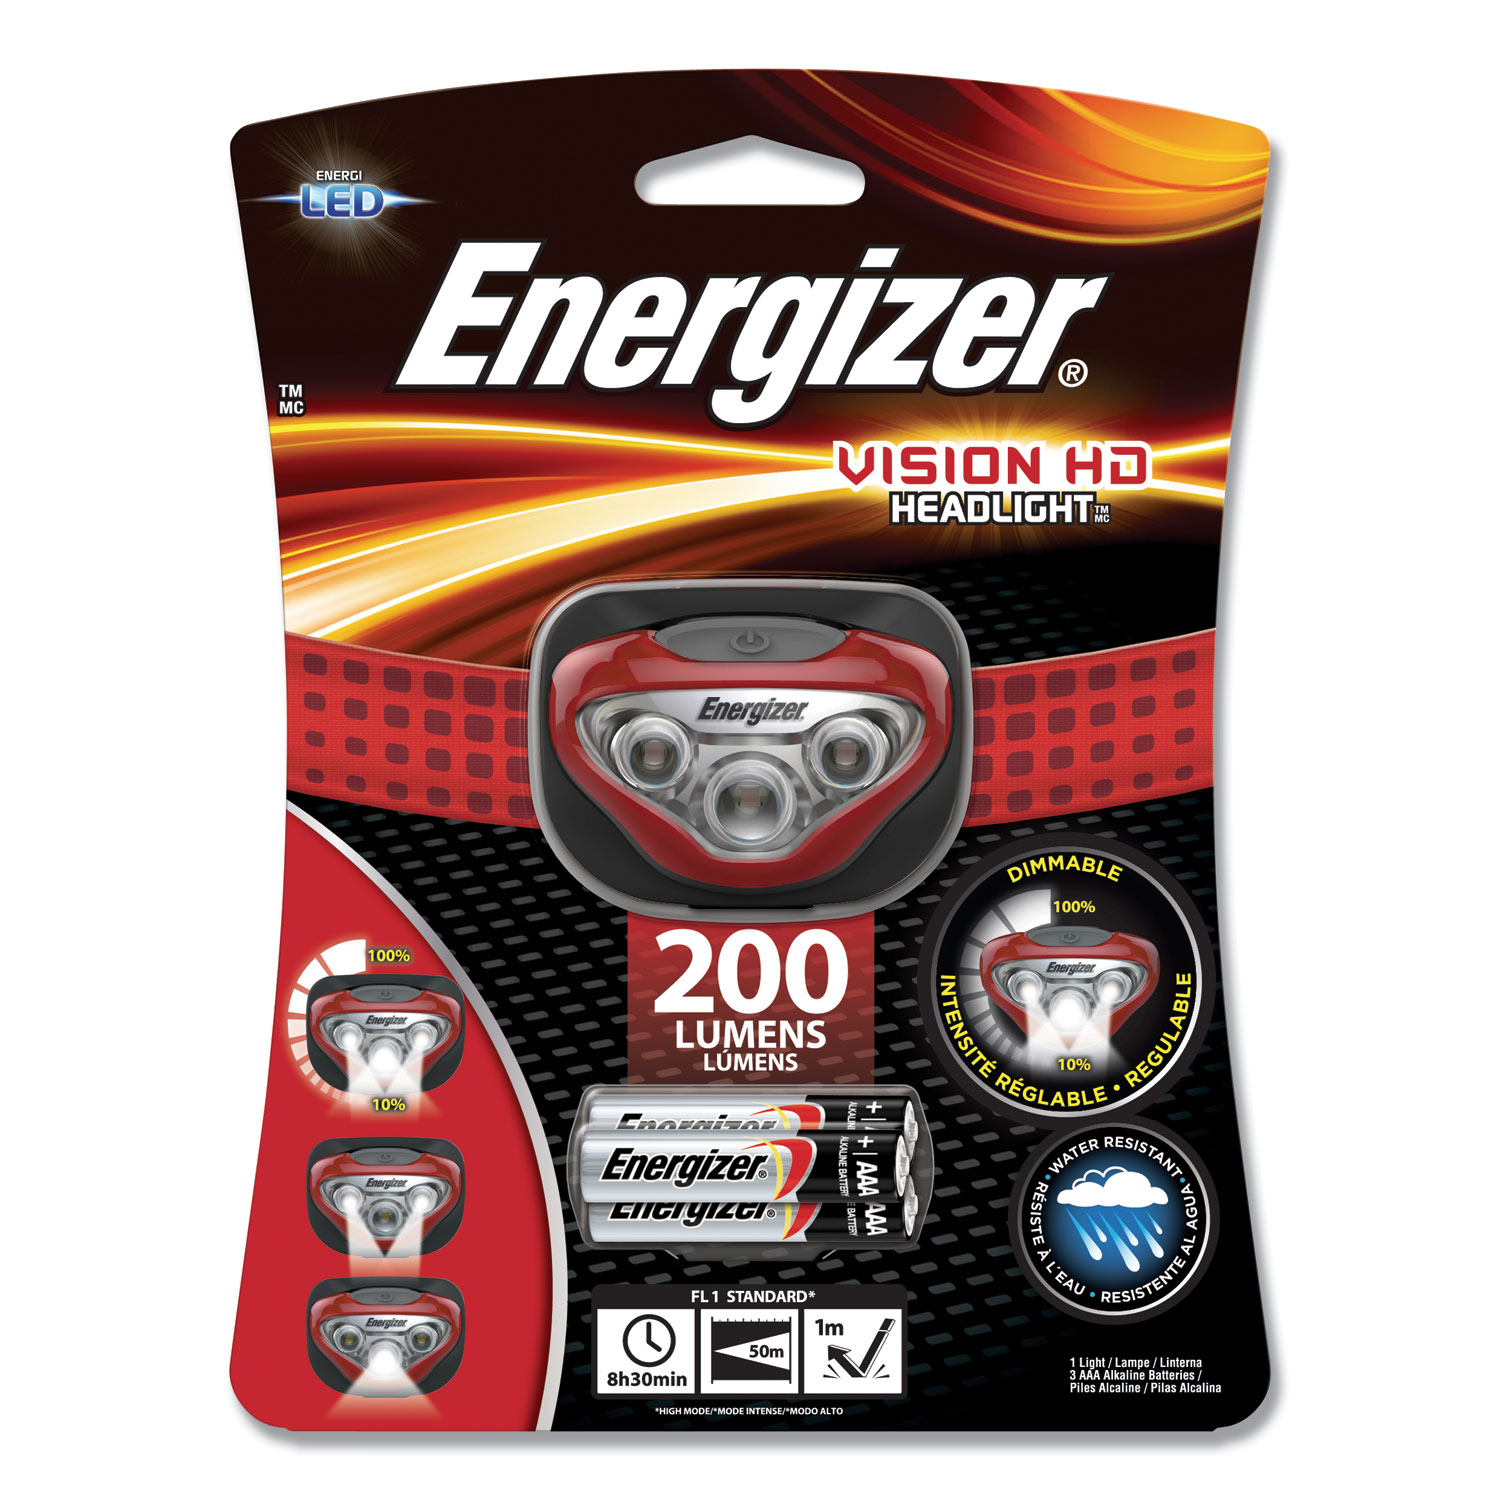  Energizer HDB32E LED Headlight, 3 AAA Batteries (Included), Red (EVEHDB32E) 